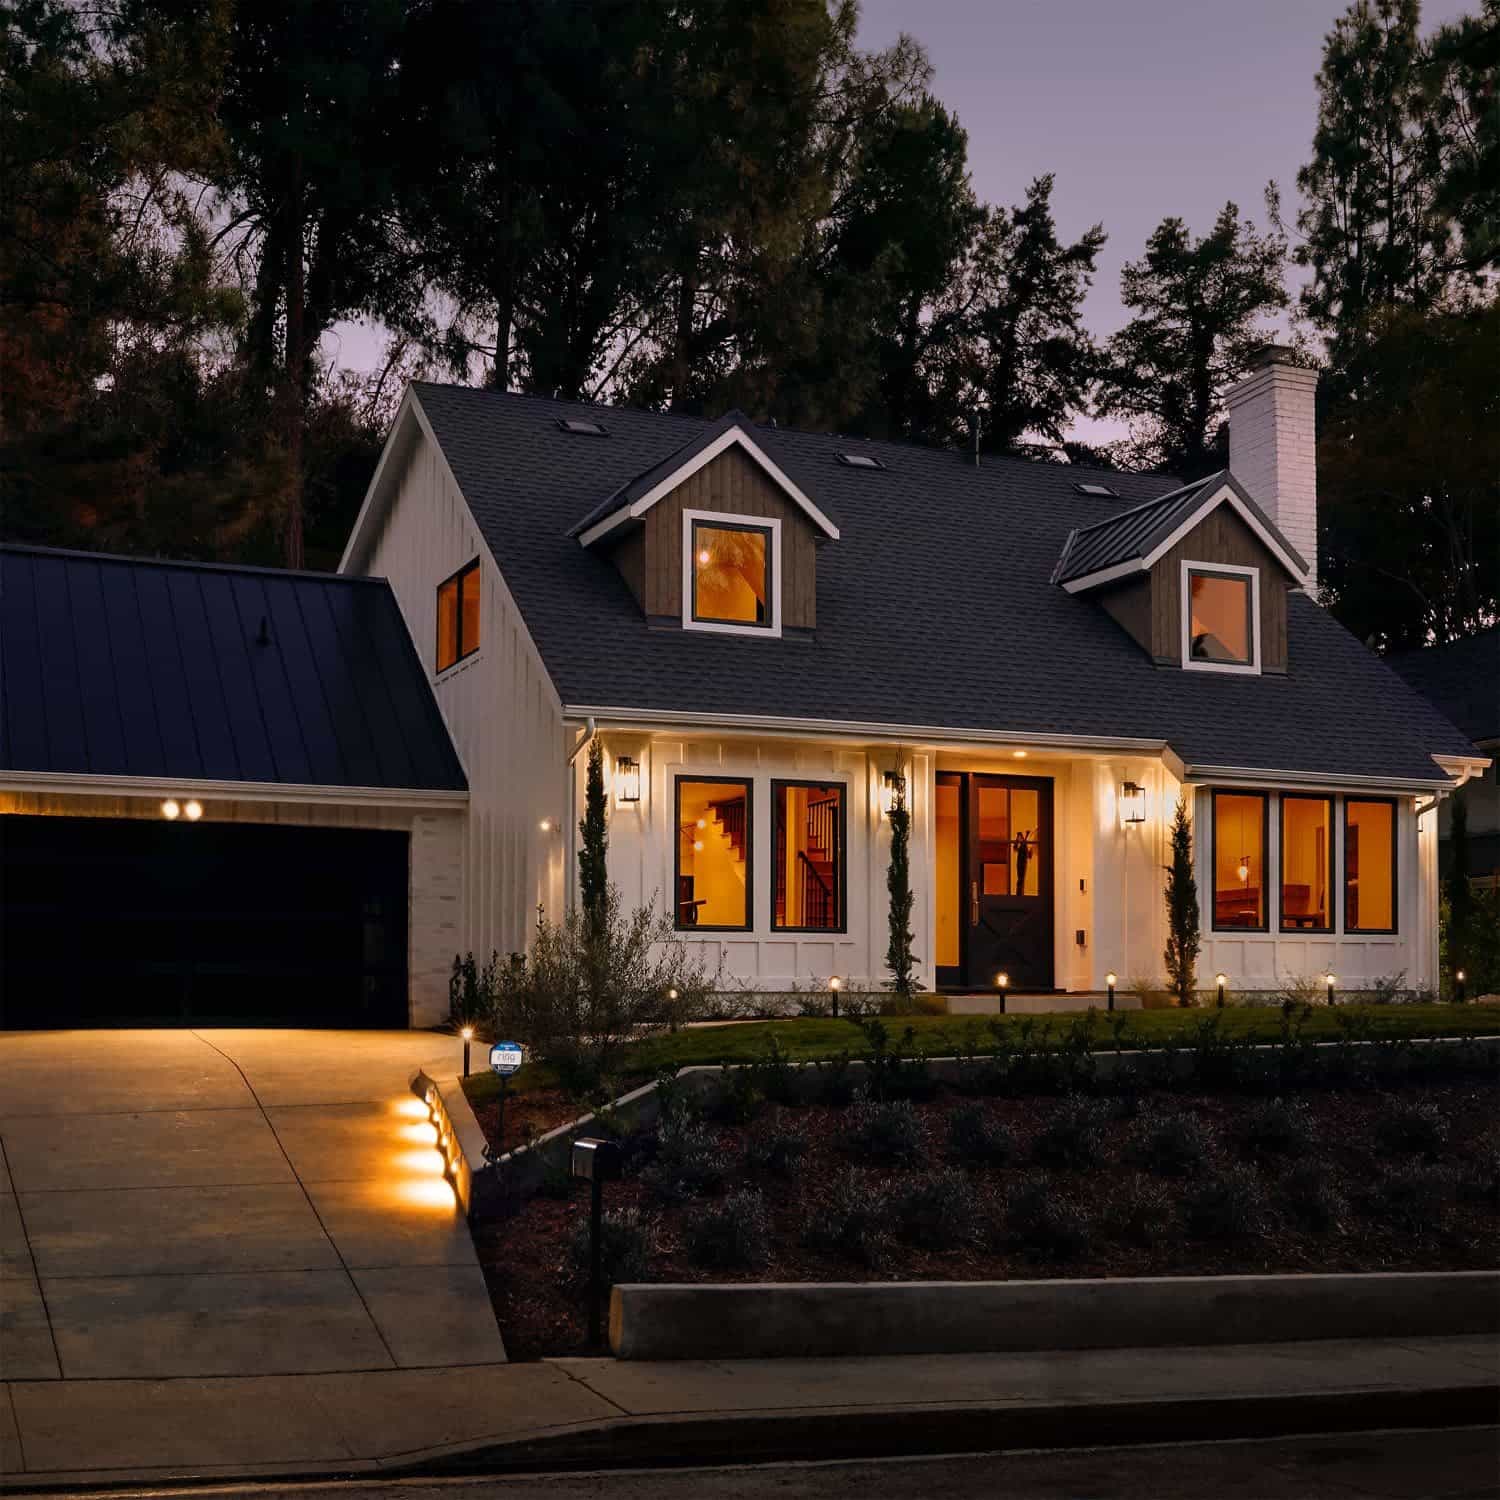 Smart Lighting Spotlight Battery - Outside at dusk, a home is lit up with an array of Ring Smart Lighting products, including the Spotlight Battery.